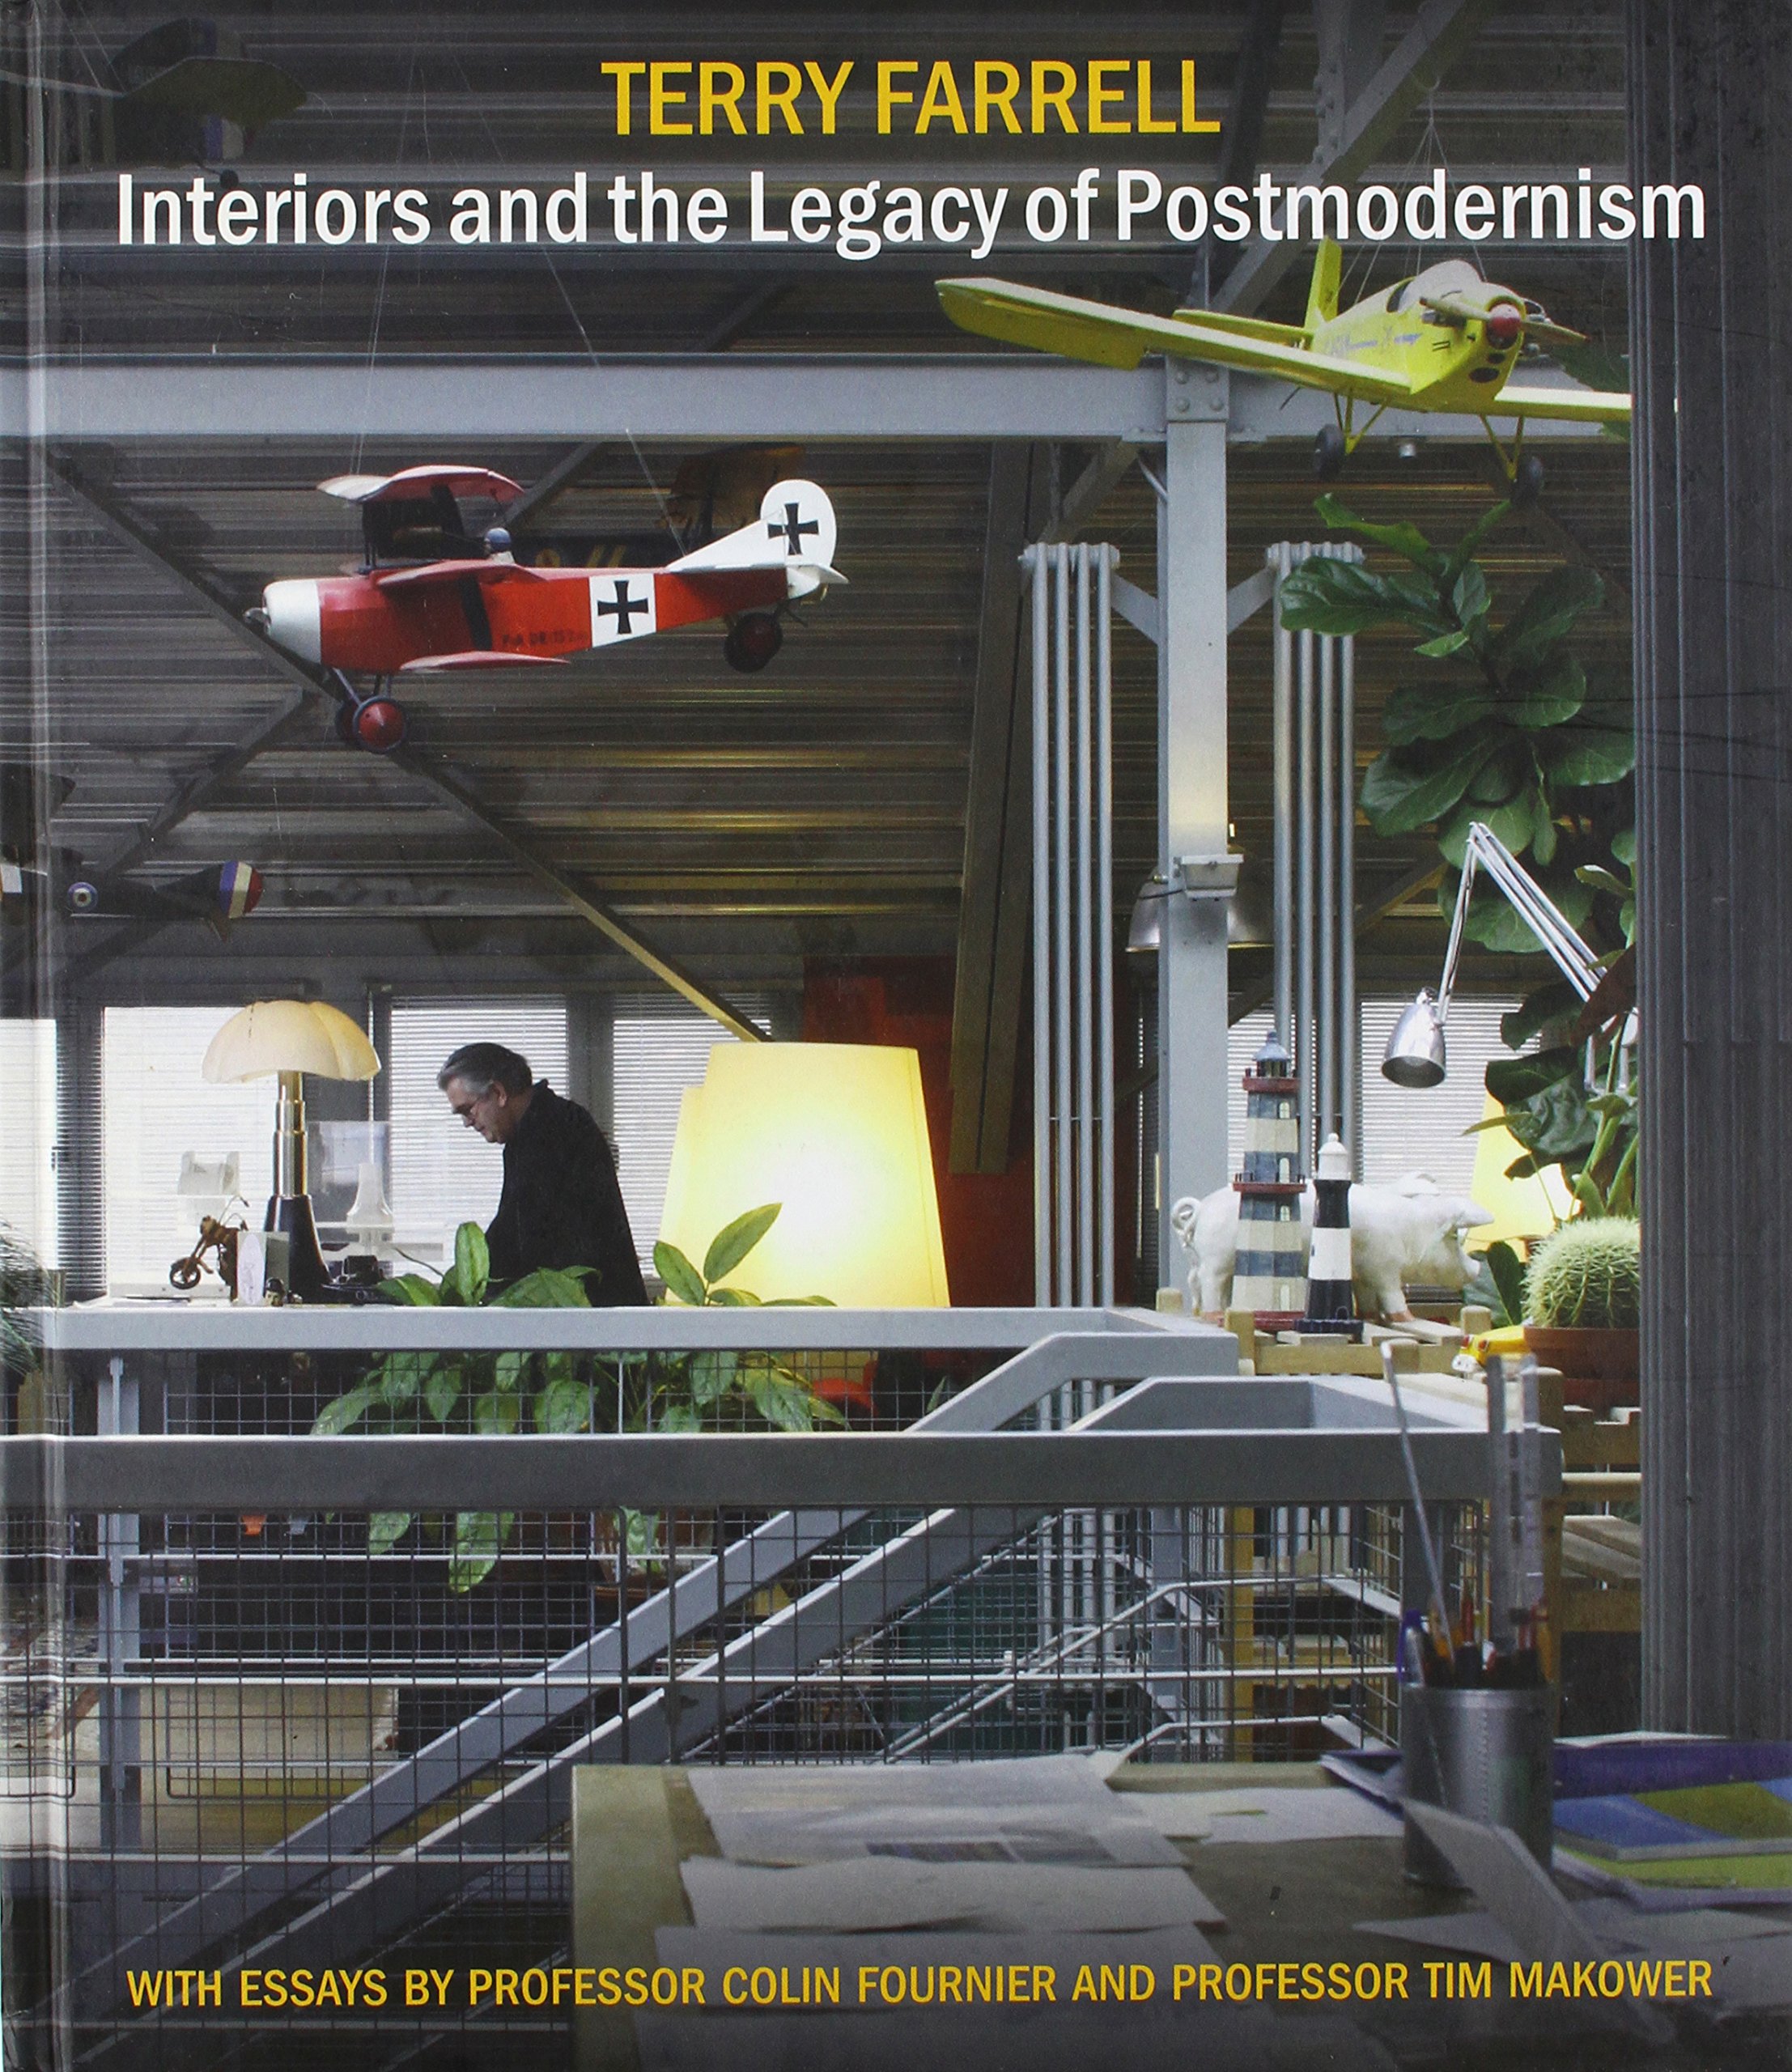 Terry Farrell: Interiors and the Legacy of Postmodernism